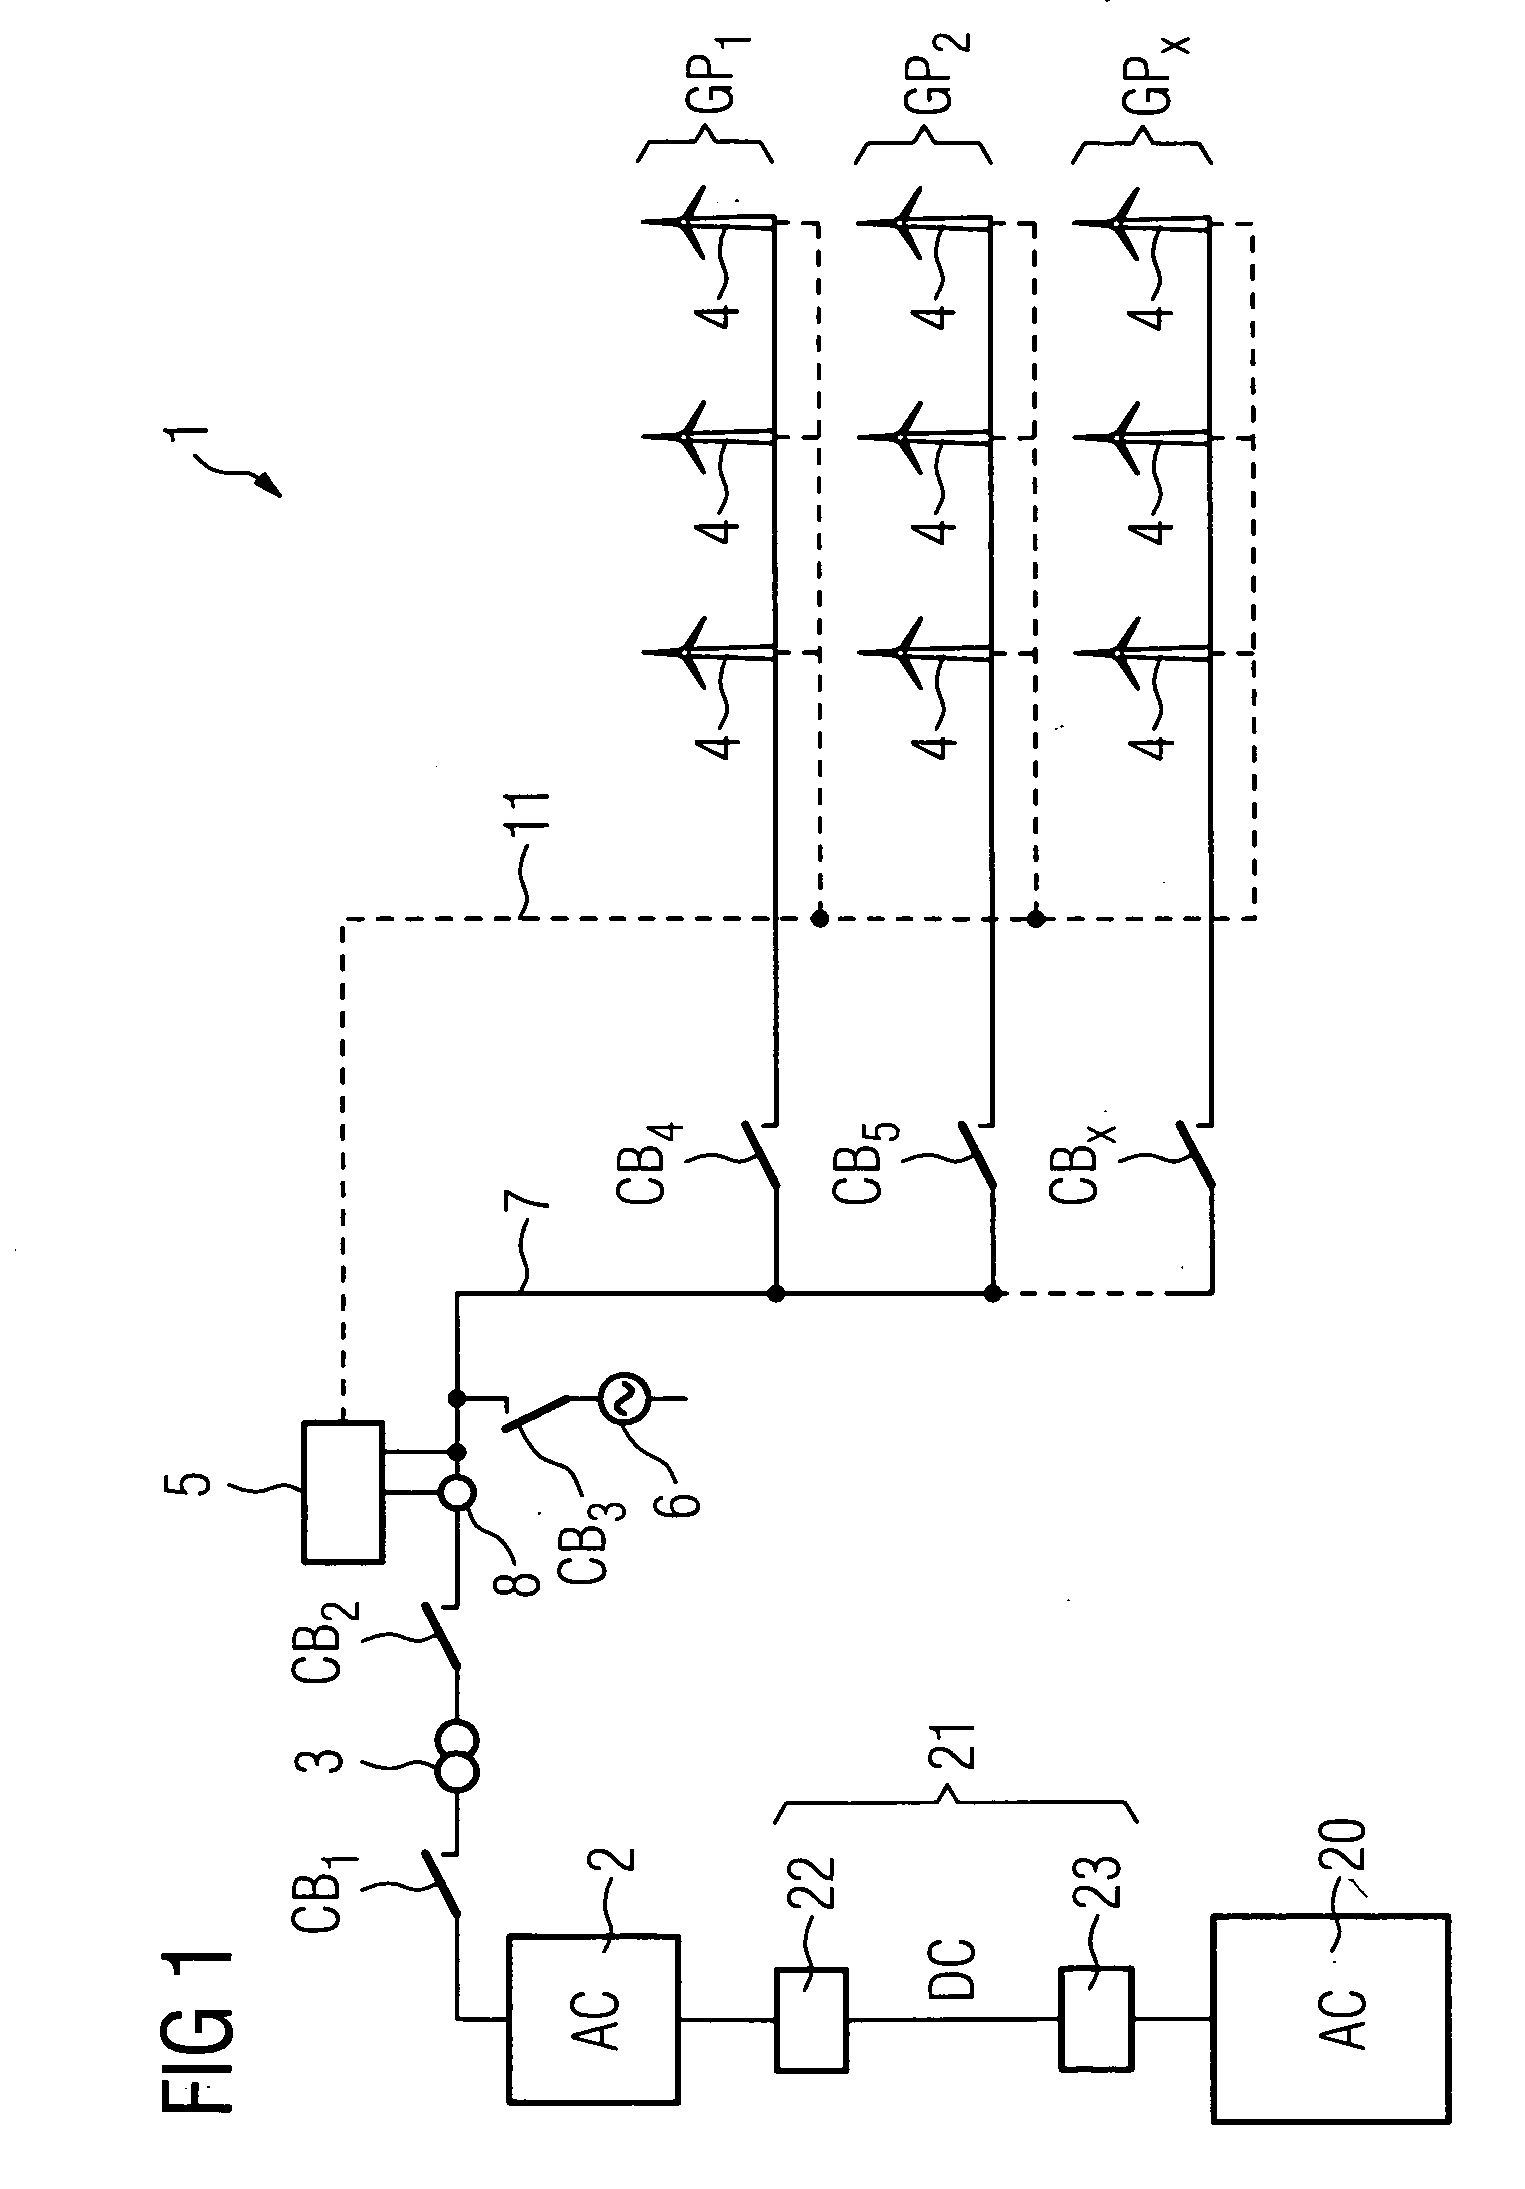 Method of start up at least a part of a wind power plant, wind power plant and use of the wind power plant